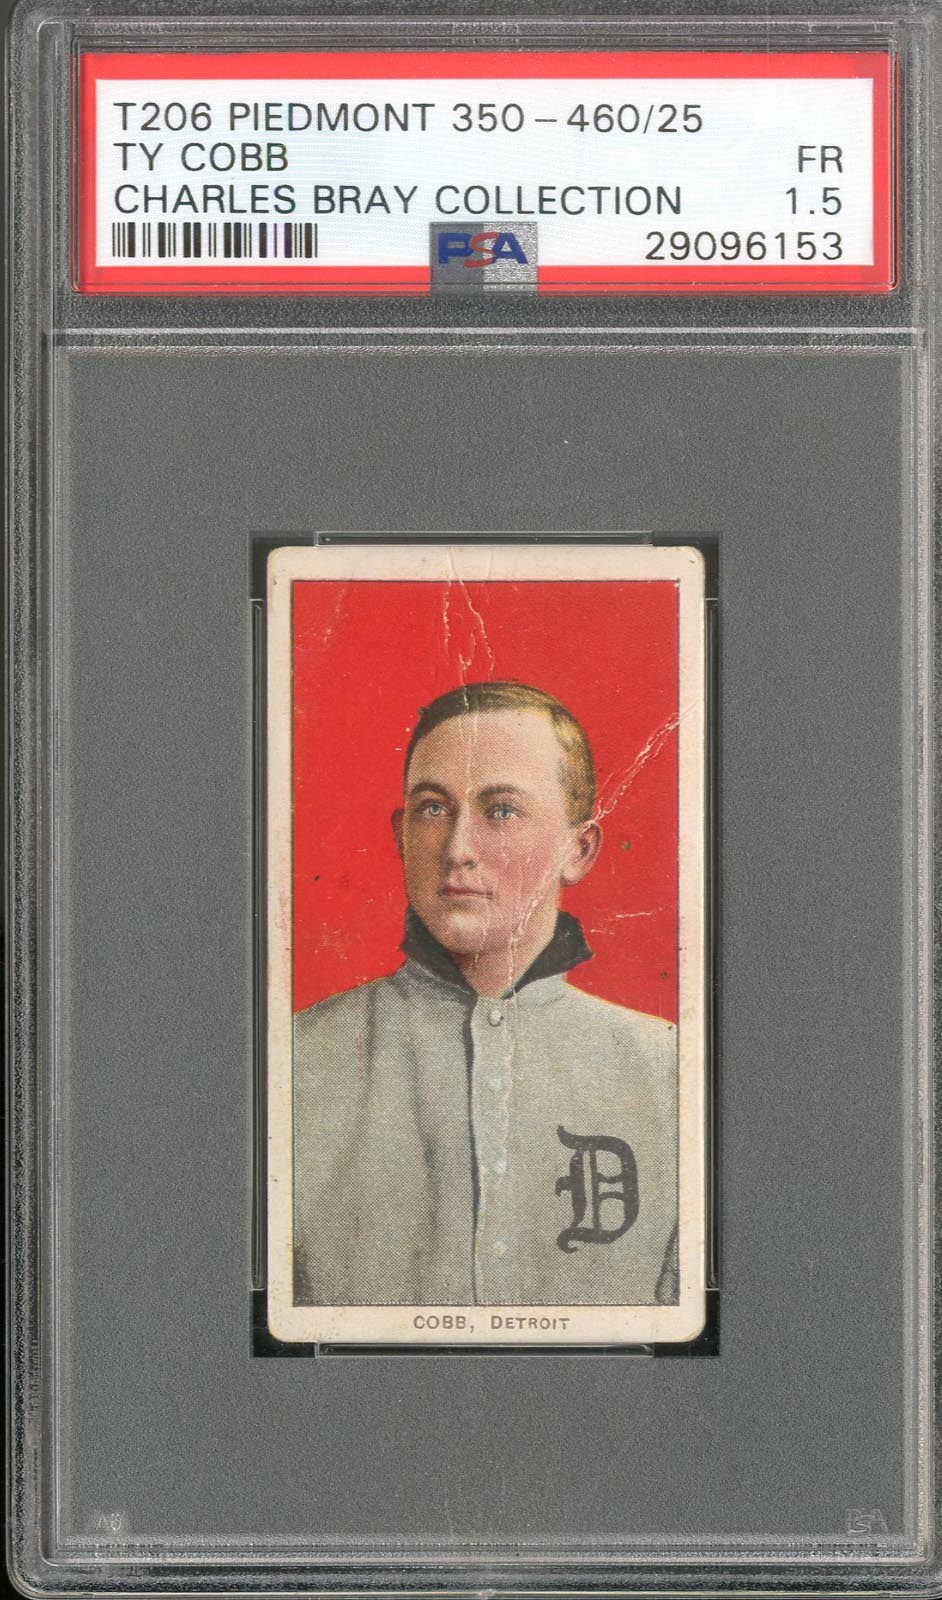 T206 Piedmont  350-460/25 Ty Cobb PSA 1.5 From The Charles Bray Collection